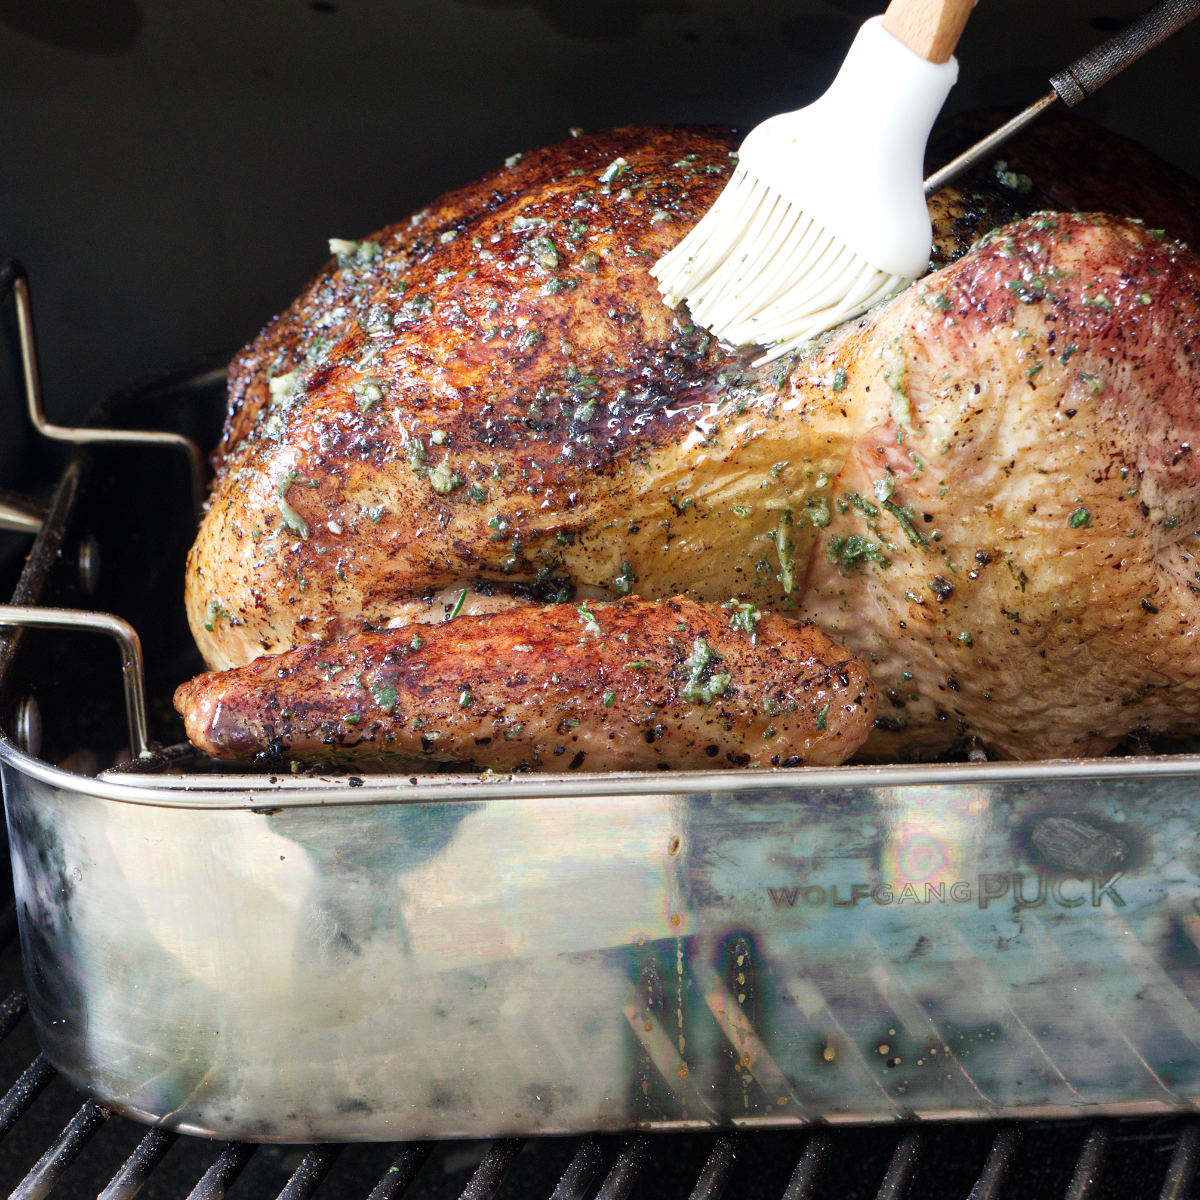 Basting the smoked turkey while it is on the pellet smoker grill.